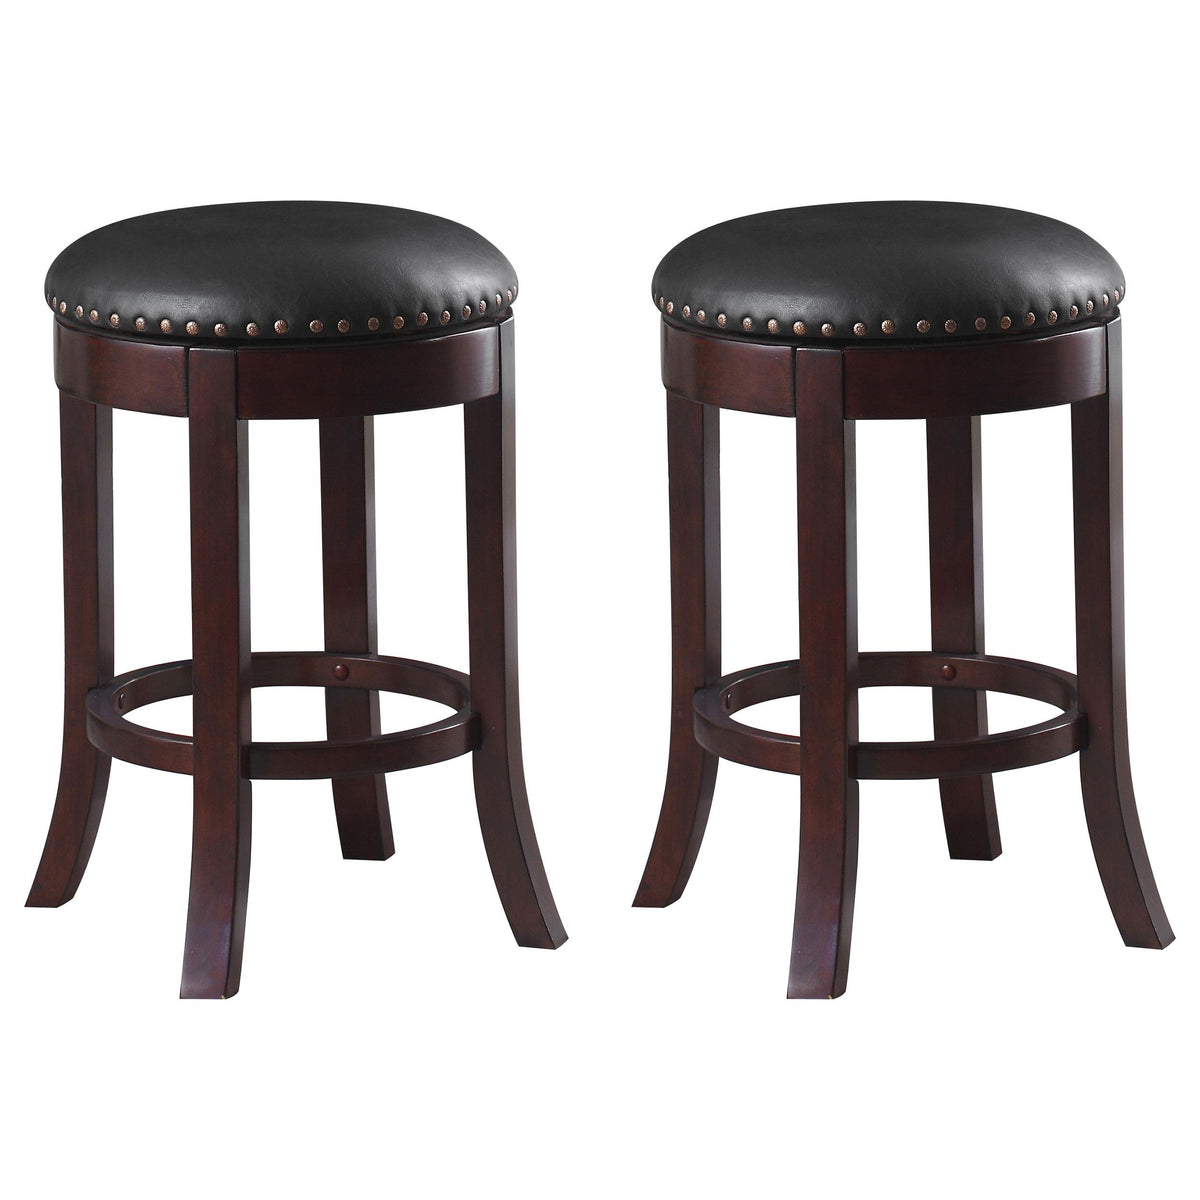 Aboushi Swivel Counter Height Stools with Upholstered Seat Brown (Set of 2) Aboushi Swivel Counter Height Stools with Upholstered Seat Brown (Set of 2) 